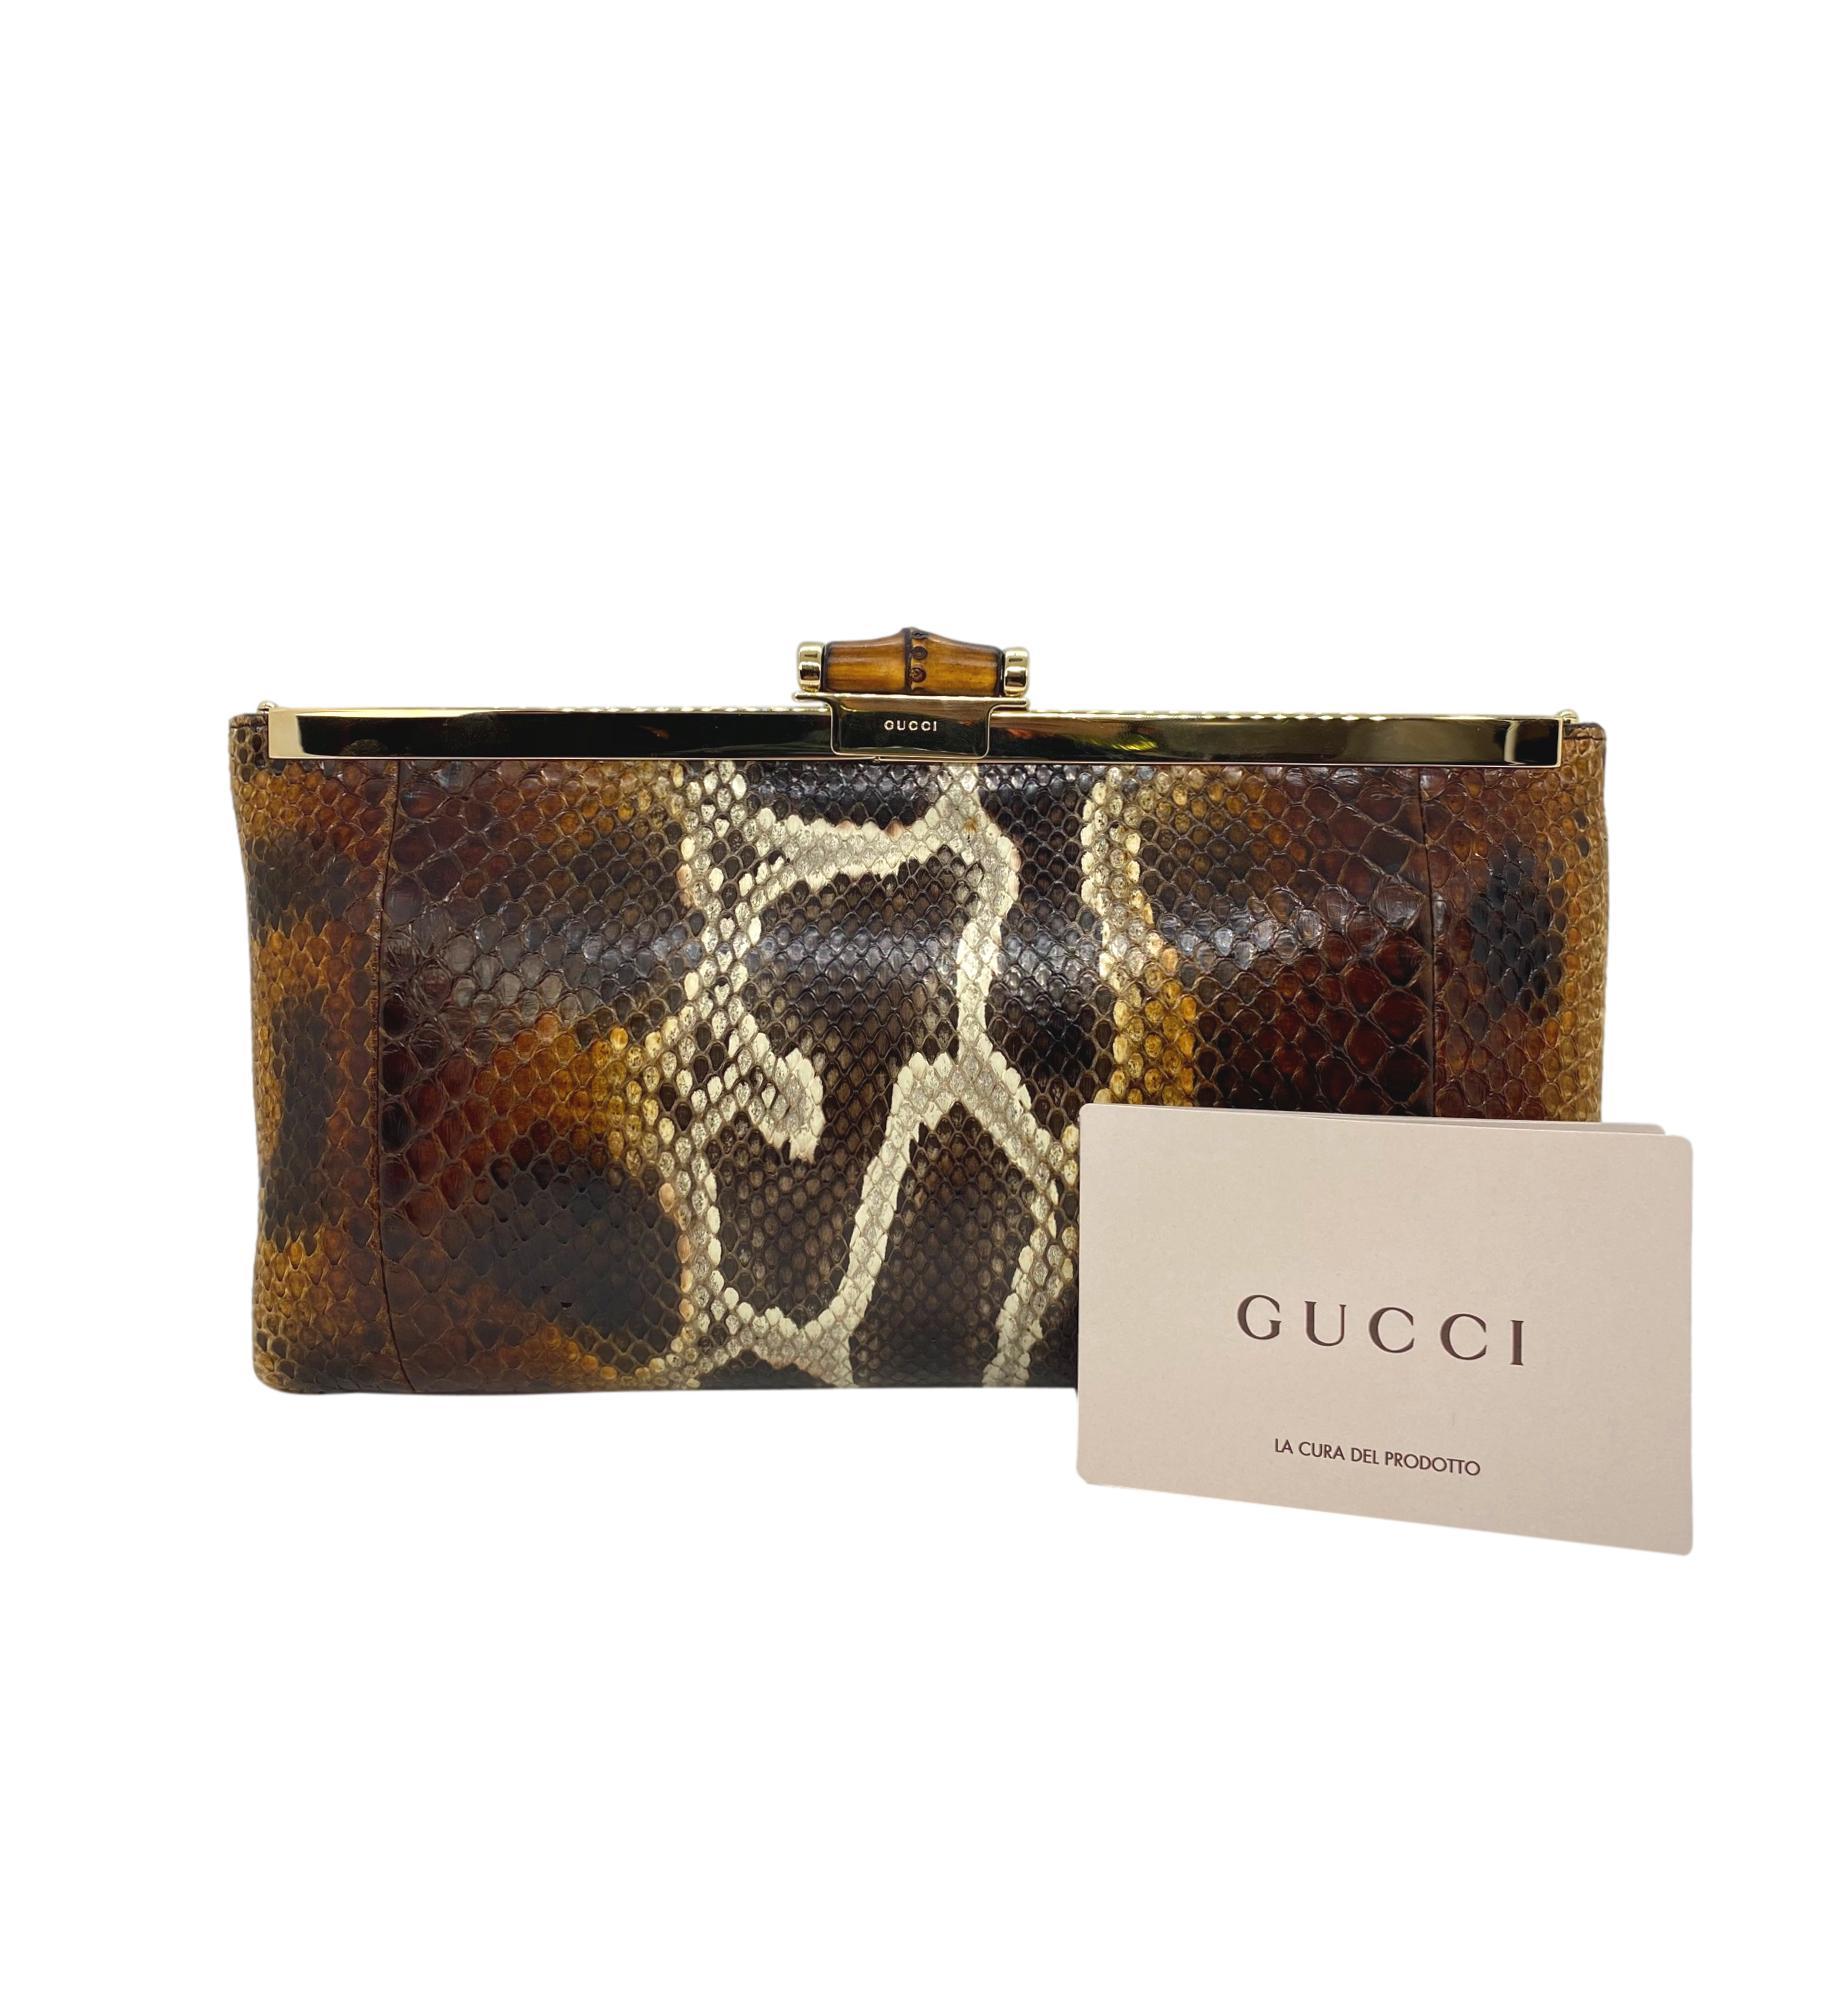 Extremely Rare Limited Edition Gucci Tom Ford Python Minaudière Runway Frame Bag. Making it's debut on the Spring Summer 2000 Gucci Runway under Tom Ford's creative direction, this one of a kind Gucci bag is like no other. This Python frame bag is